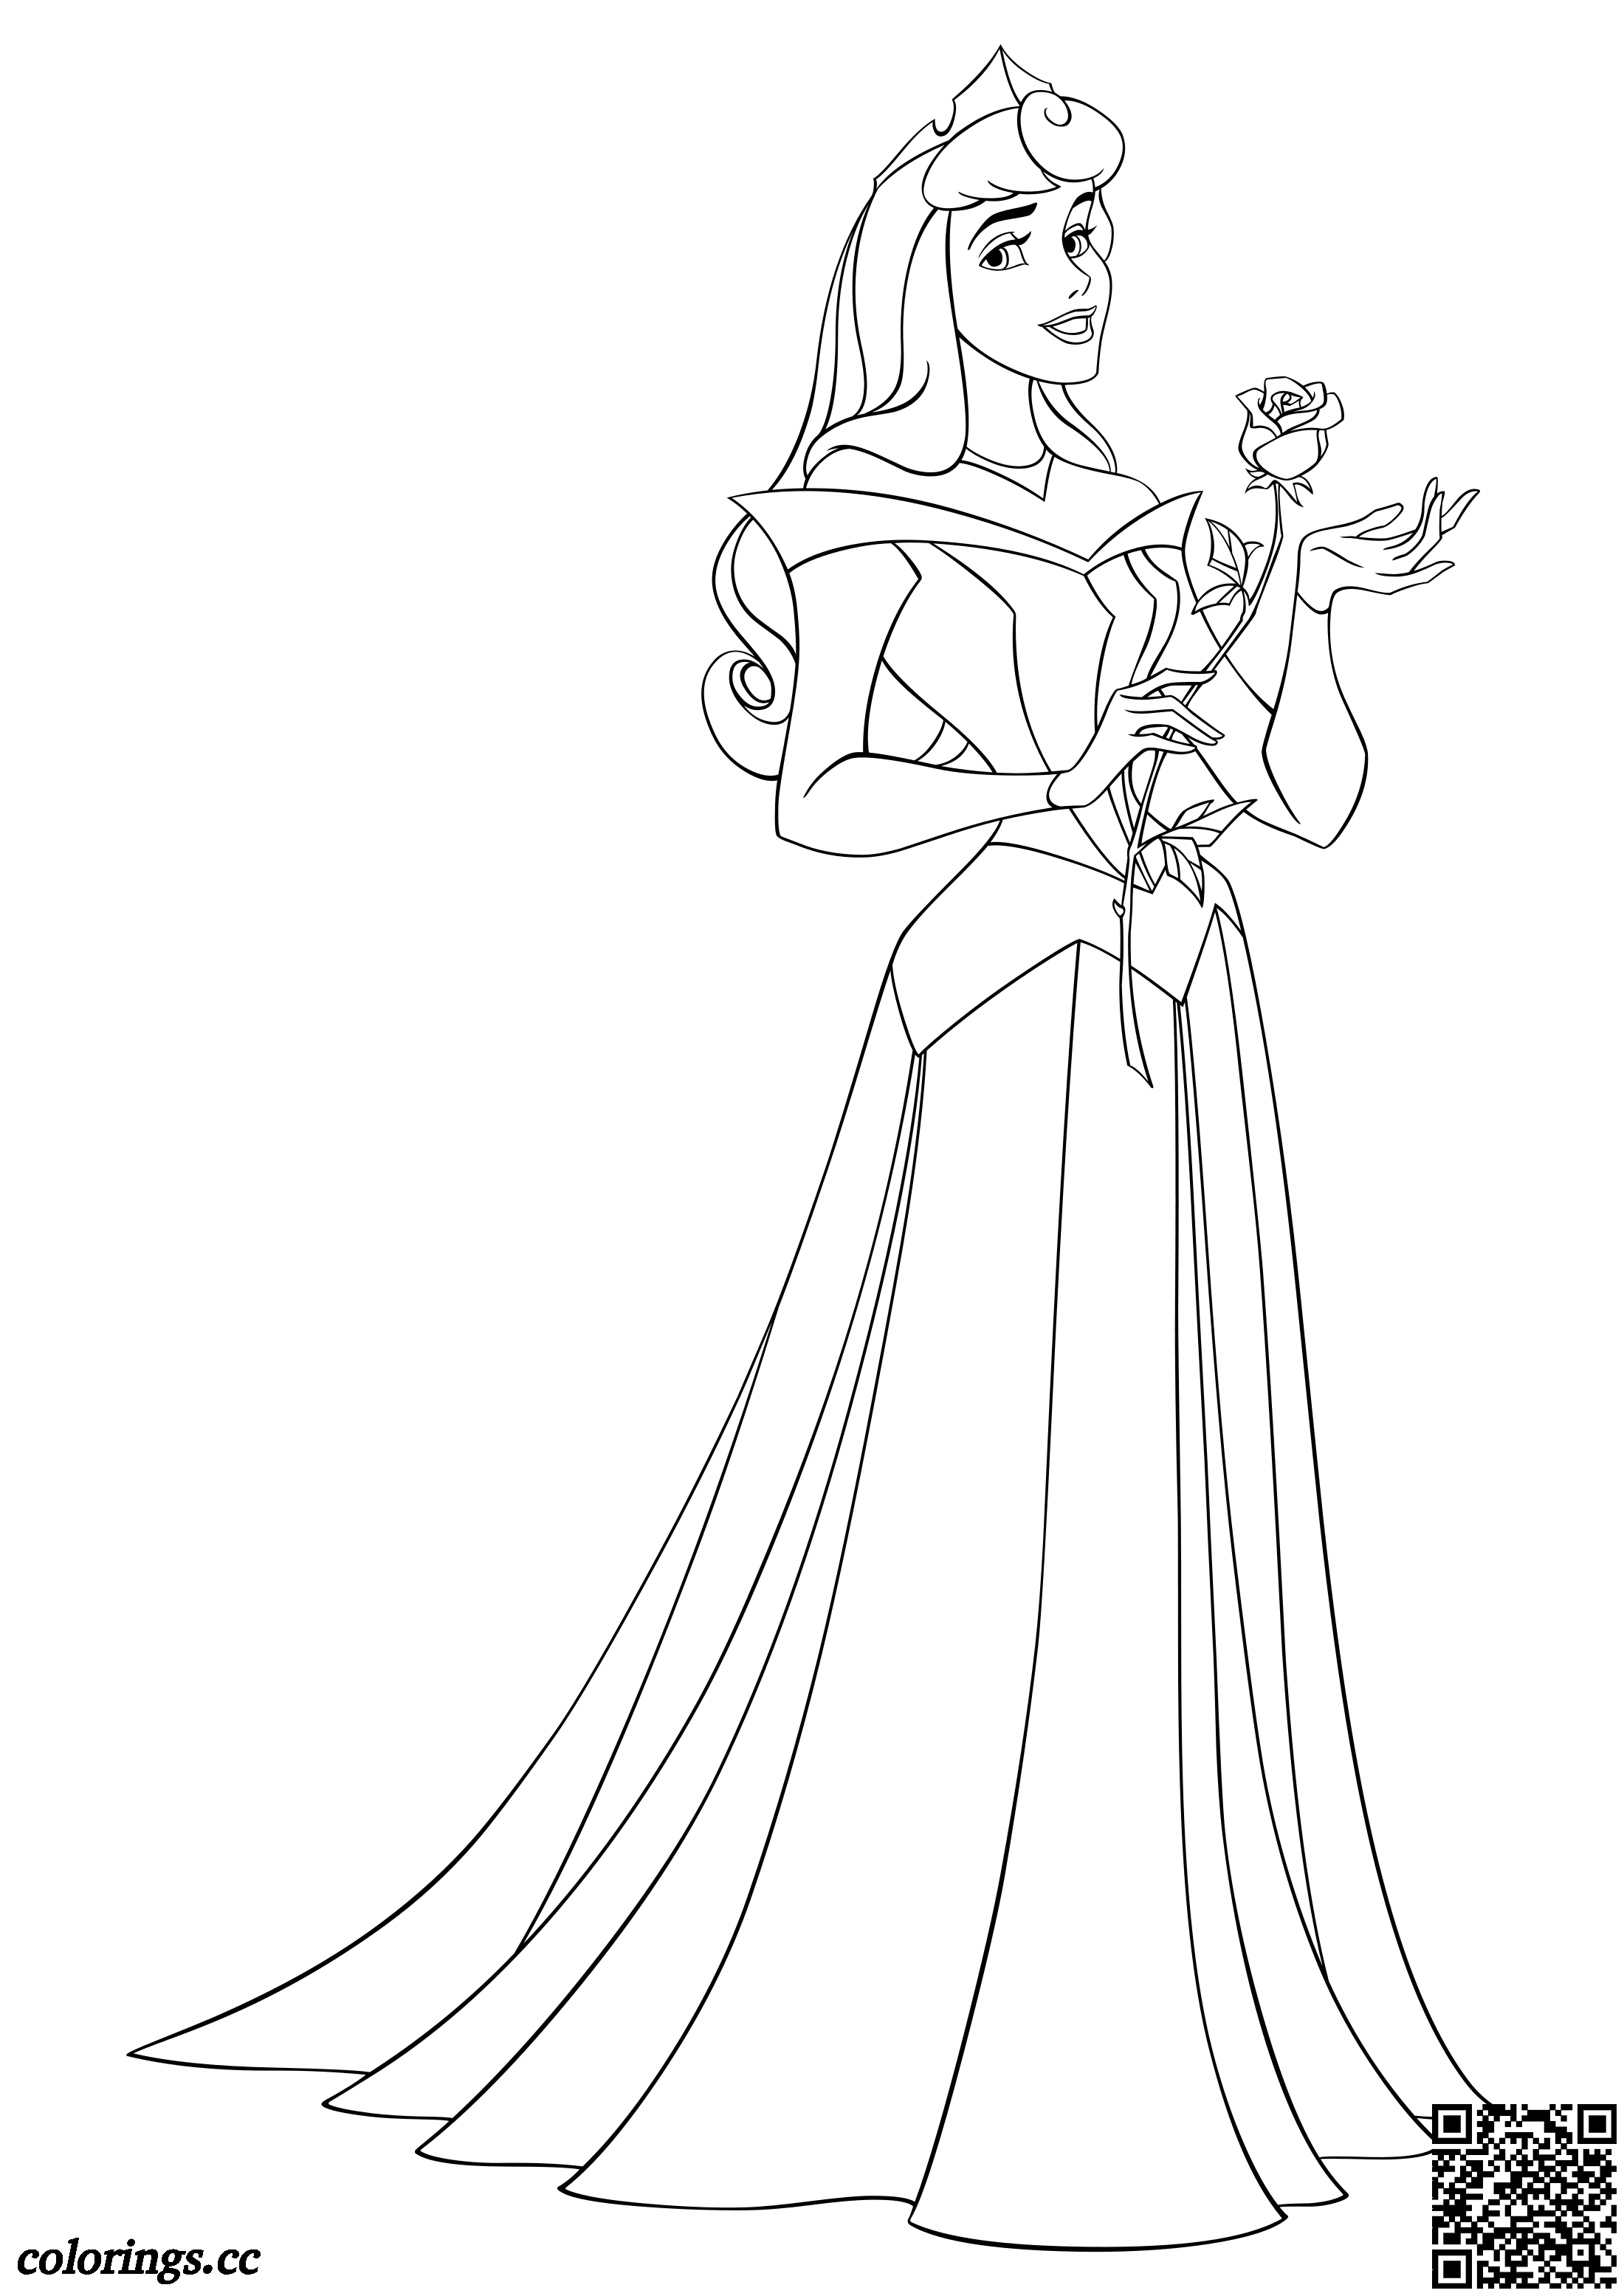 Aurora with a rose in her hand coloring pages, Disney princesses ...